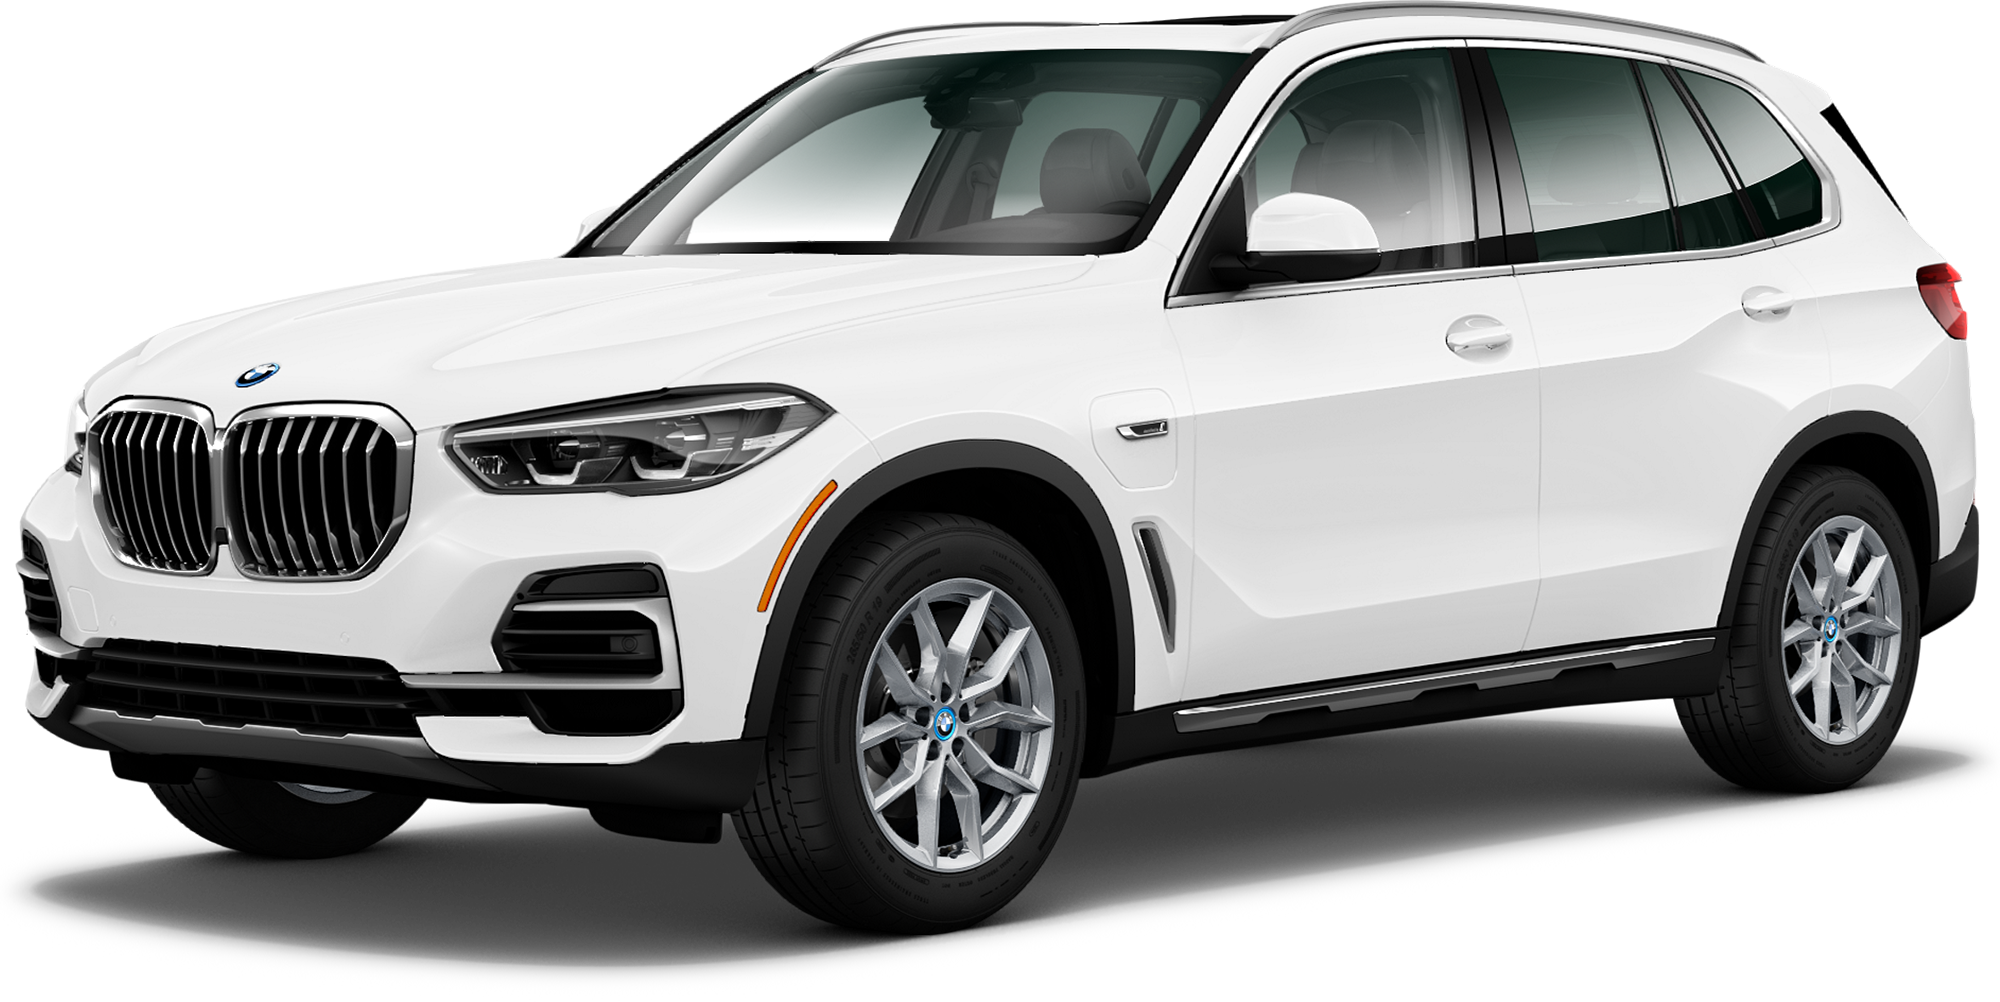 2022 BMW X5 PHEV Incentives, Specials & Offers in Northfield IL